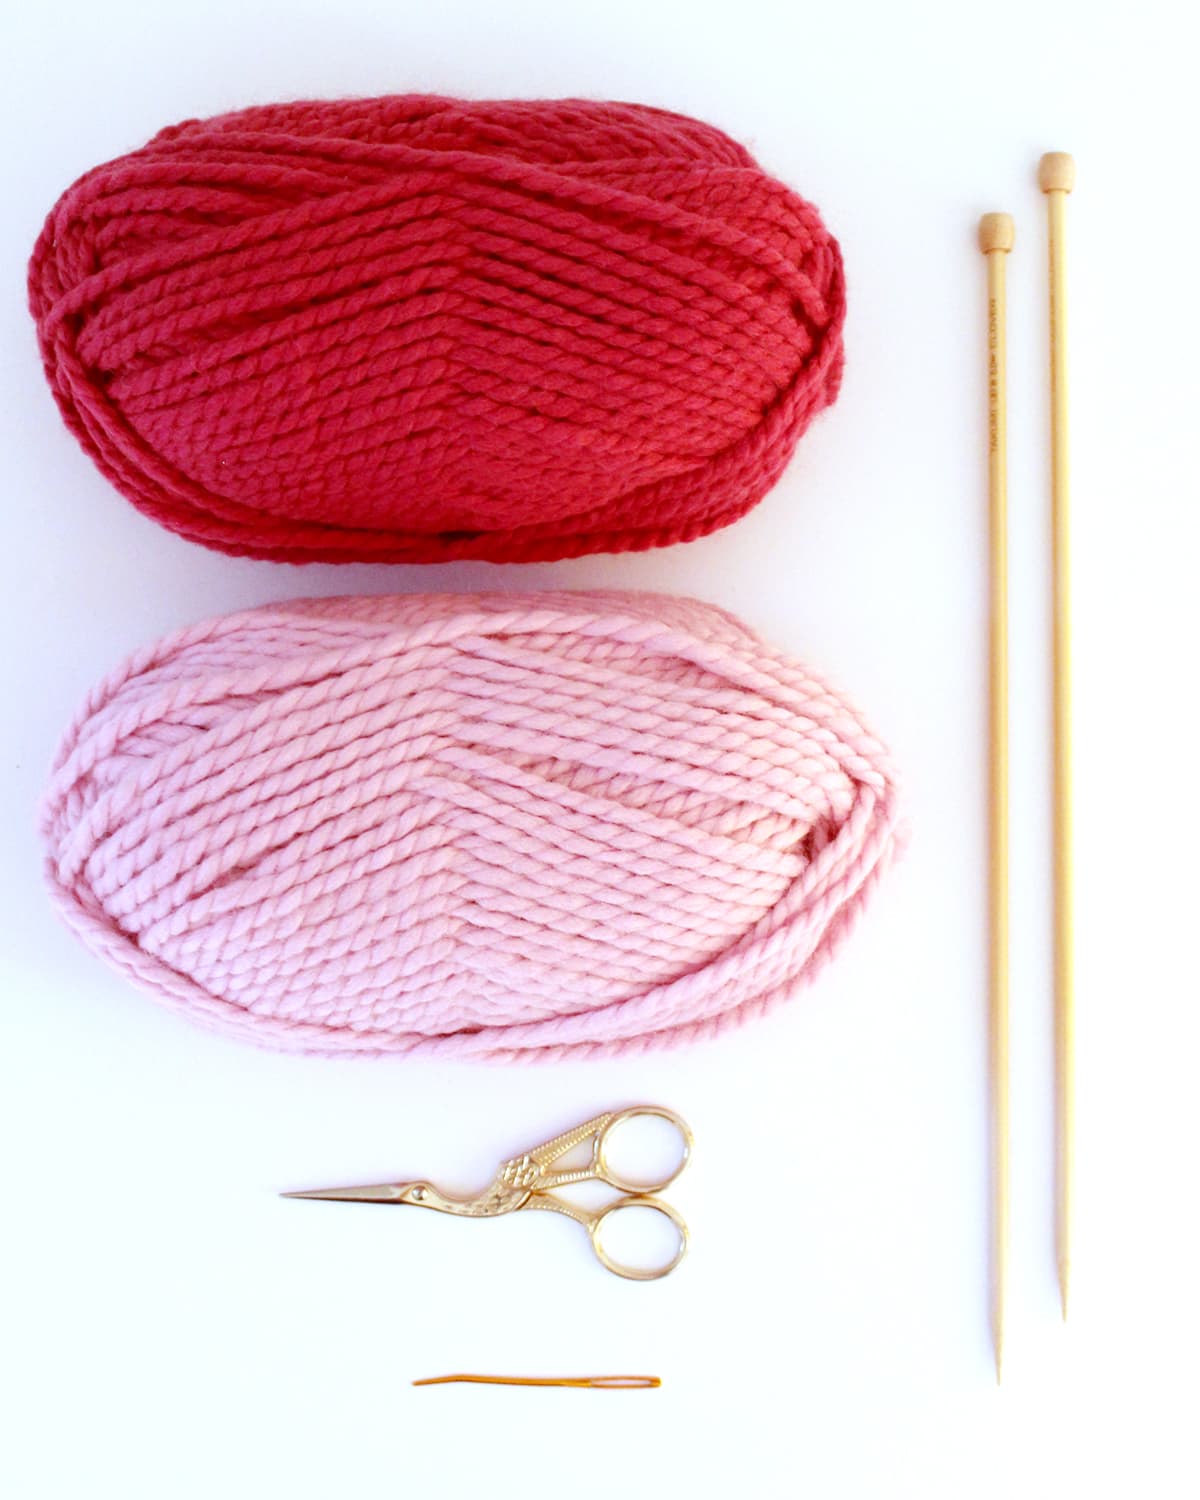 Knitting supplies of yarn, needles, scissors, and tapestry needle.